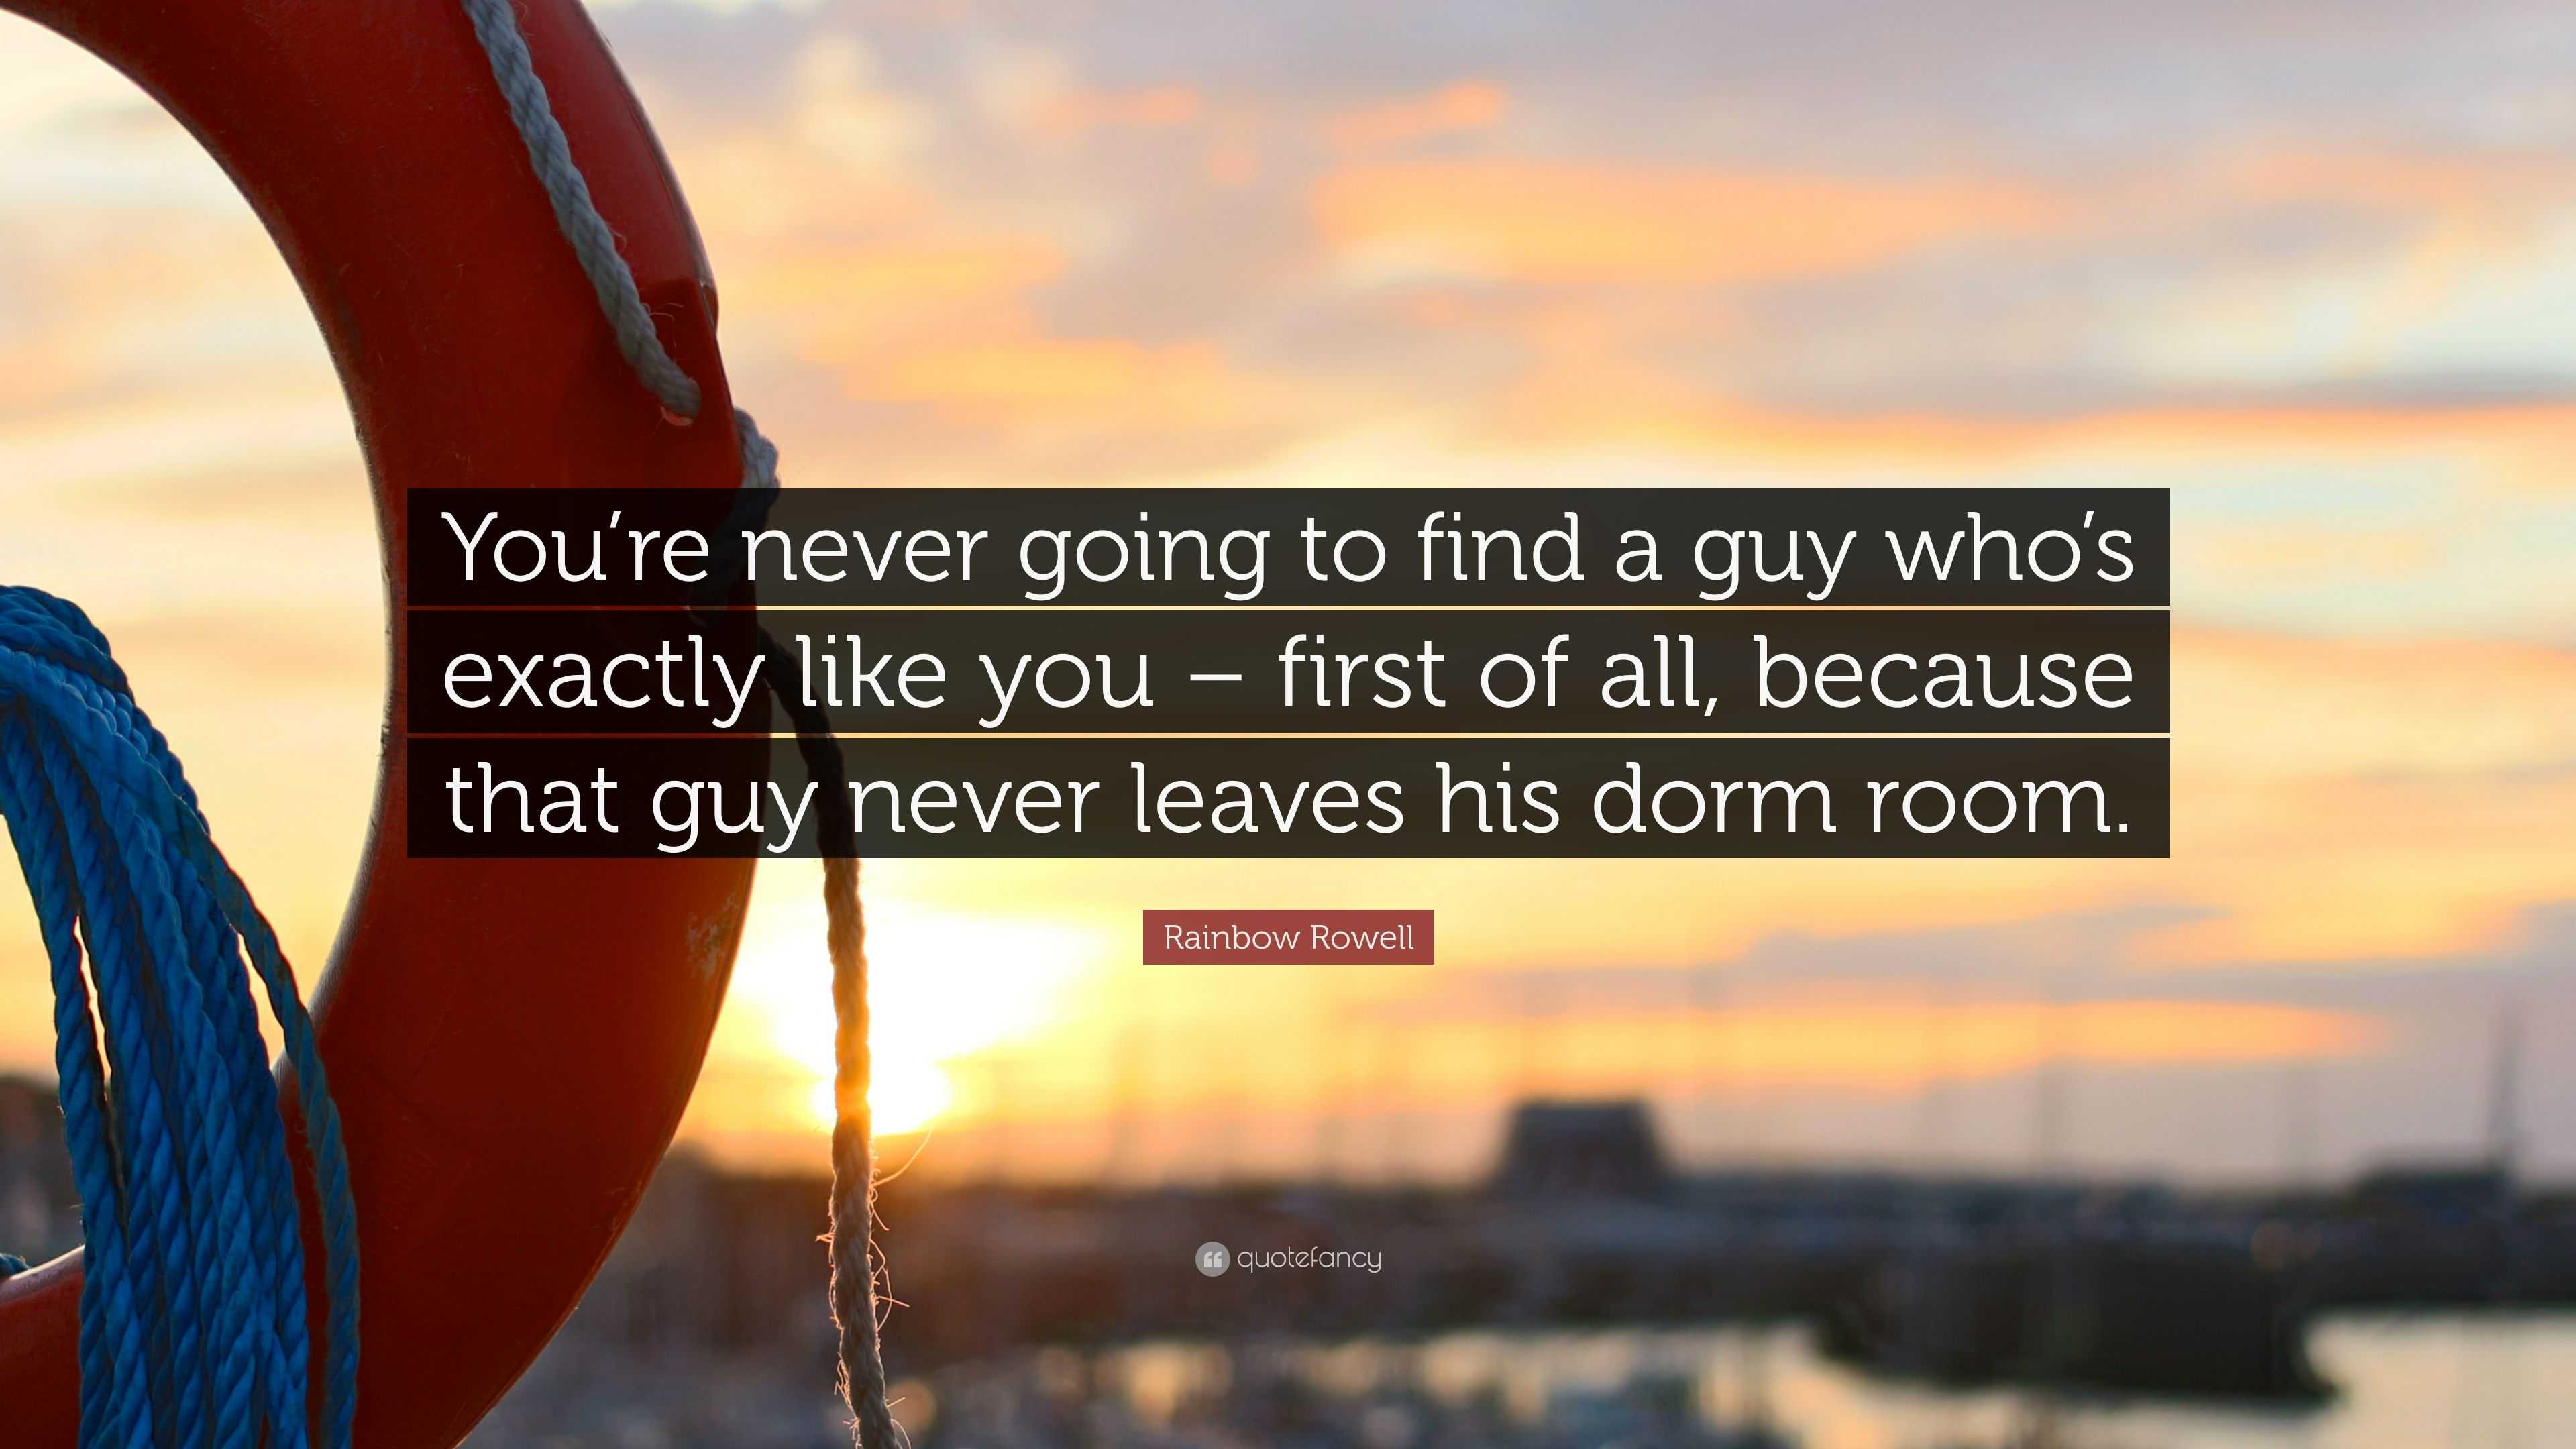 Rainbow Rowell Quote “You re never going to find a guy who s exactly